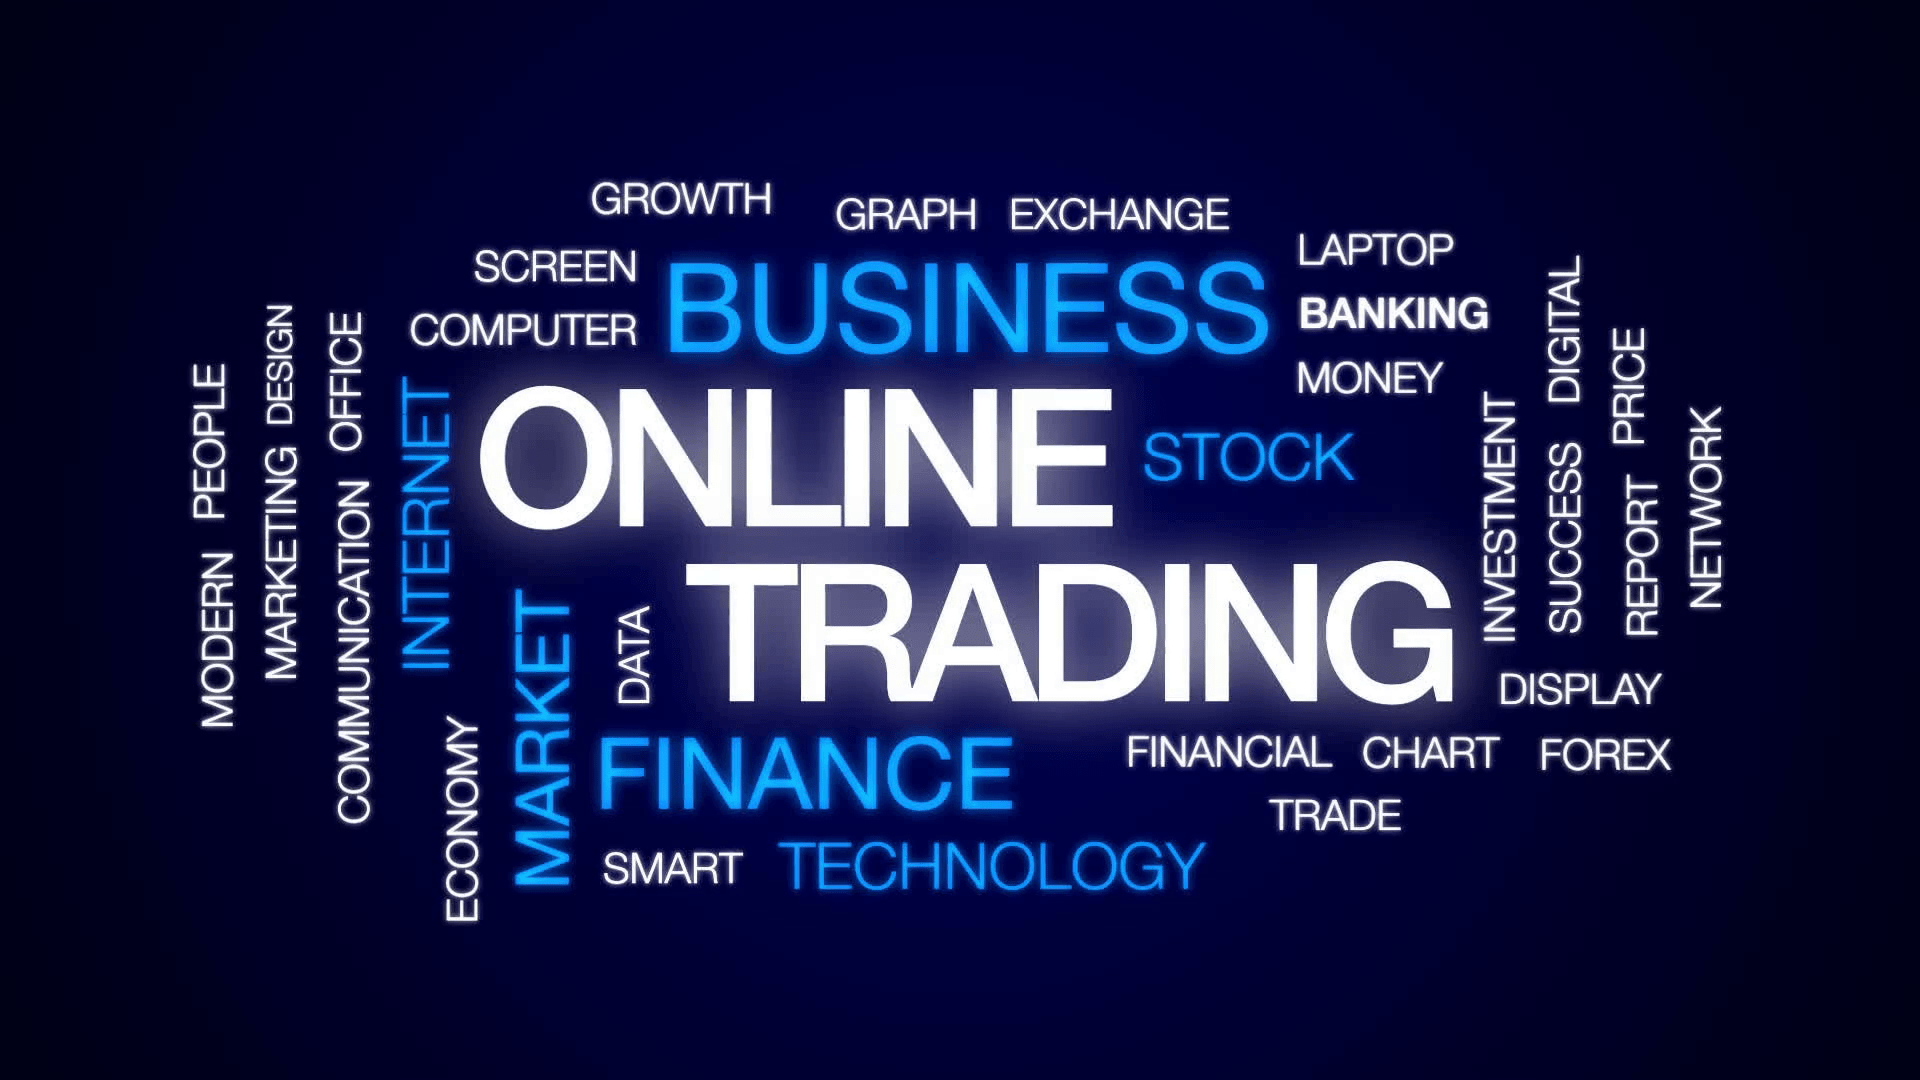 Traders Wallpaper. Online stock trading, Financial charts, Online trading